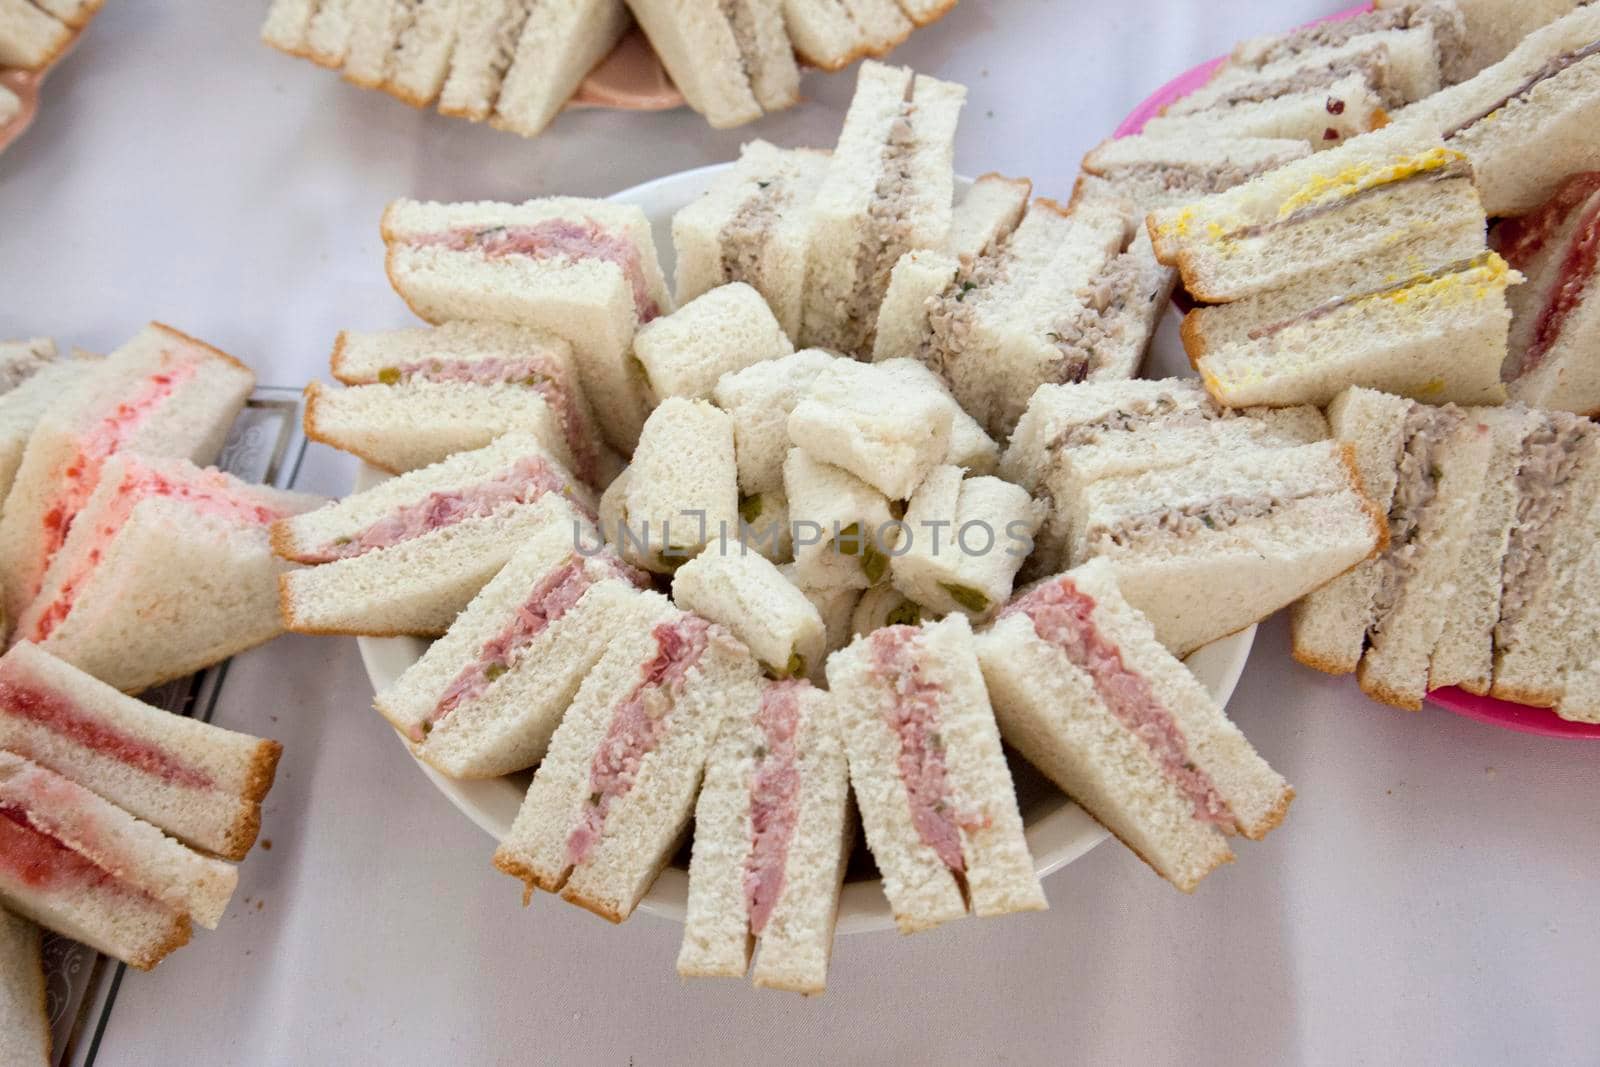 Tray of asparagus and ham sandwiches at a party or event 